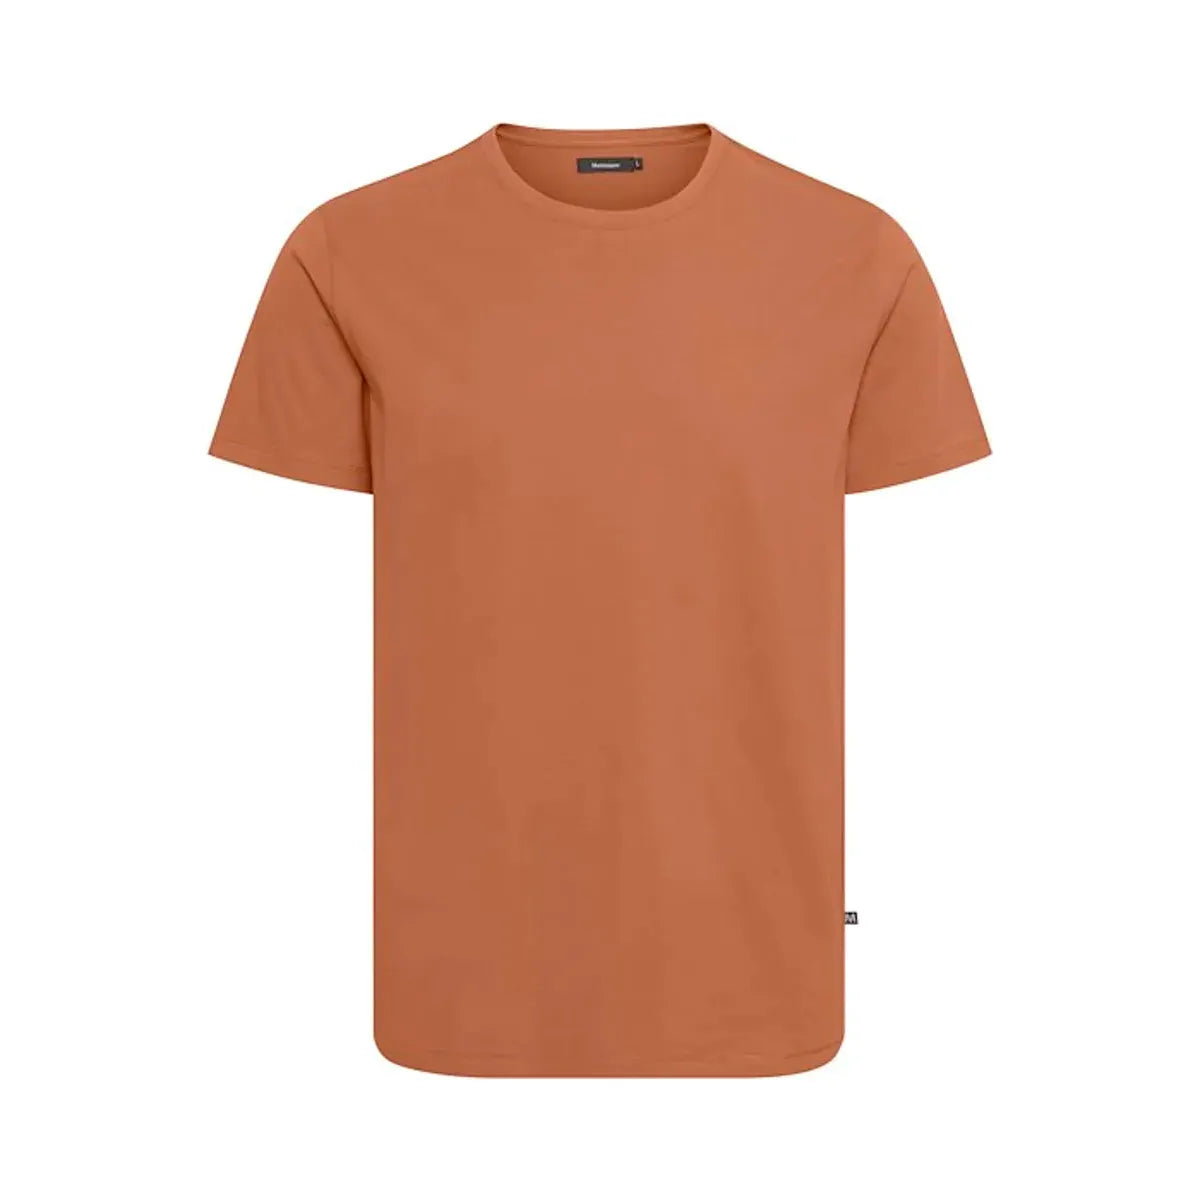 Matinique - Jermalink T-Shirt in Mocha Bisque